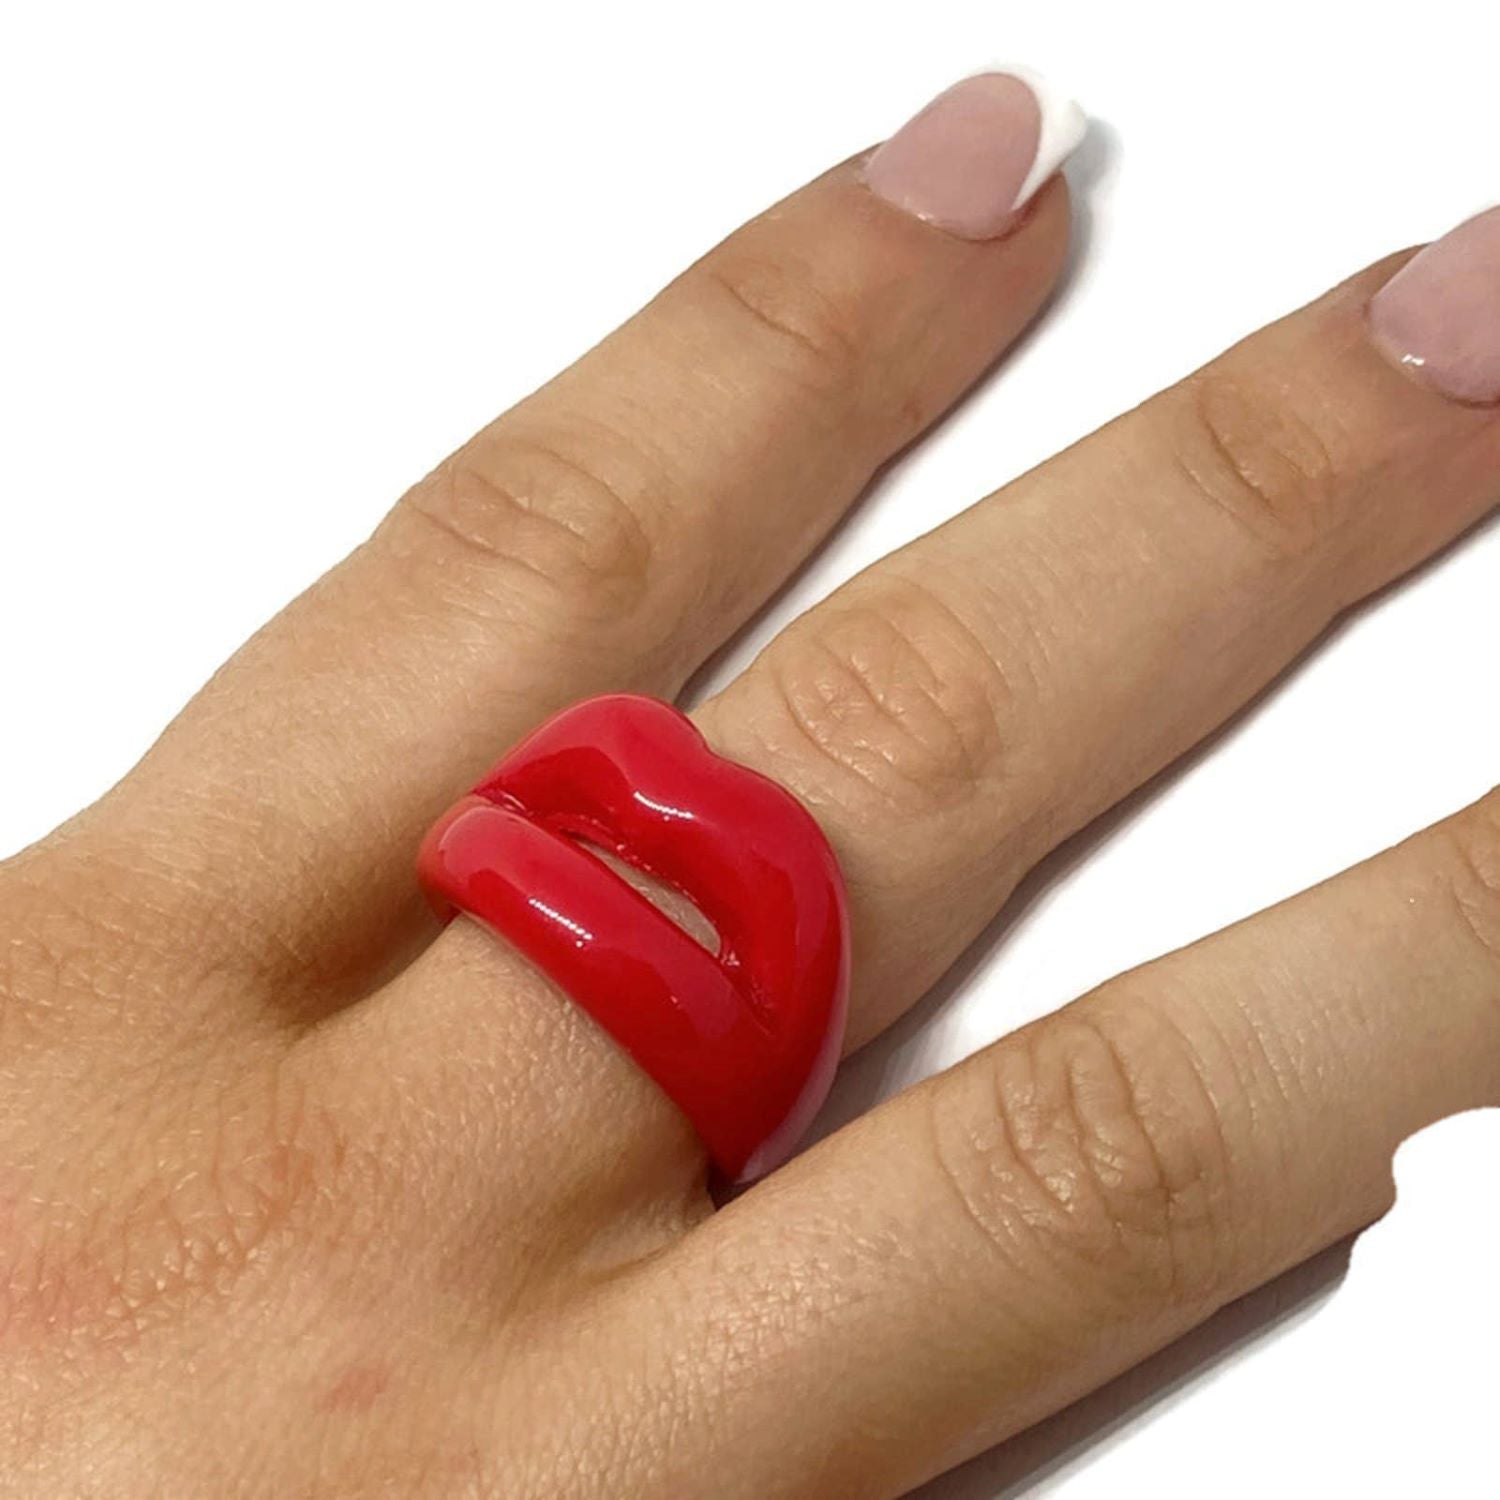 Show off your love of Rocky Horror with the Rocky Horror Resin Lips Ring! The eye-catching red statement design is fun and entertaining, adding a pop of fun to any outfit.   Size N